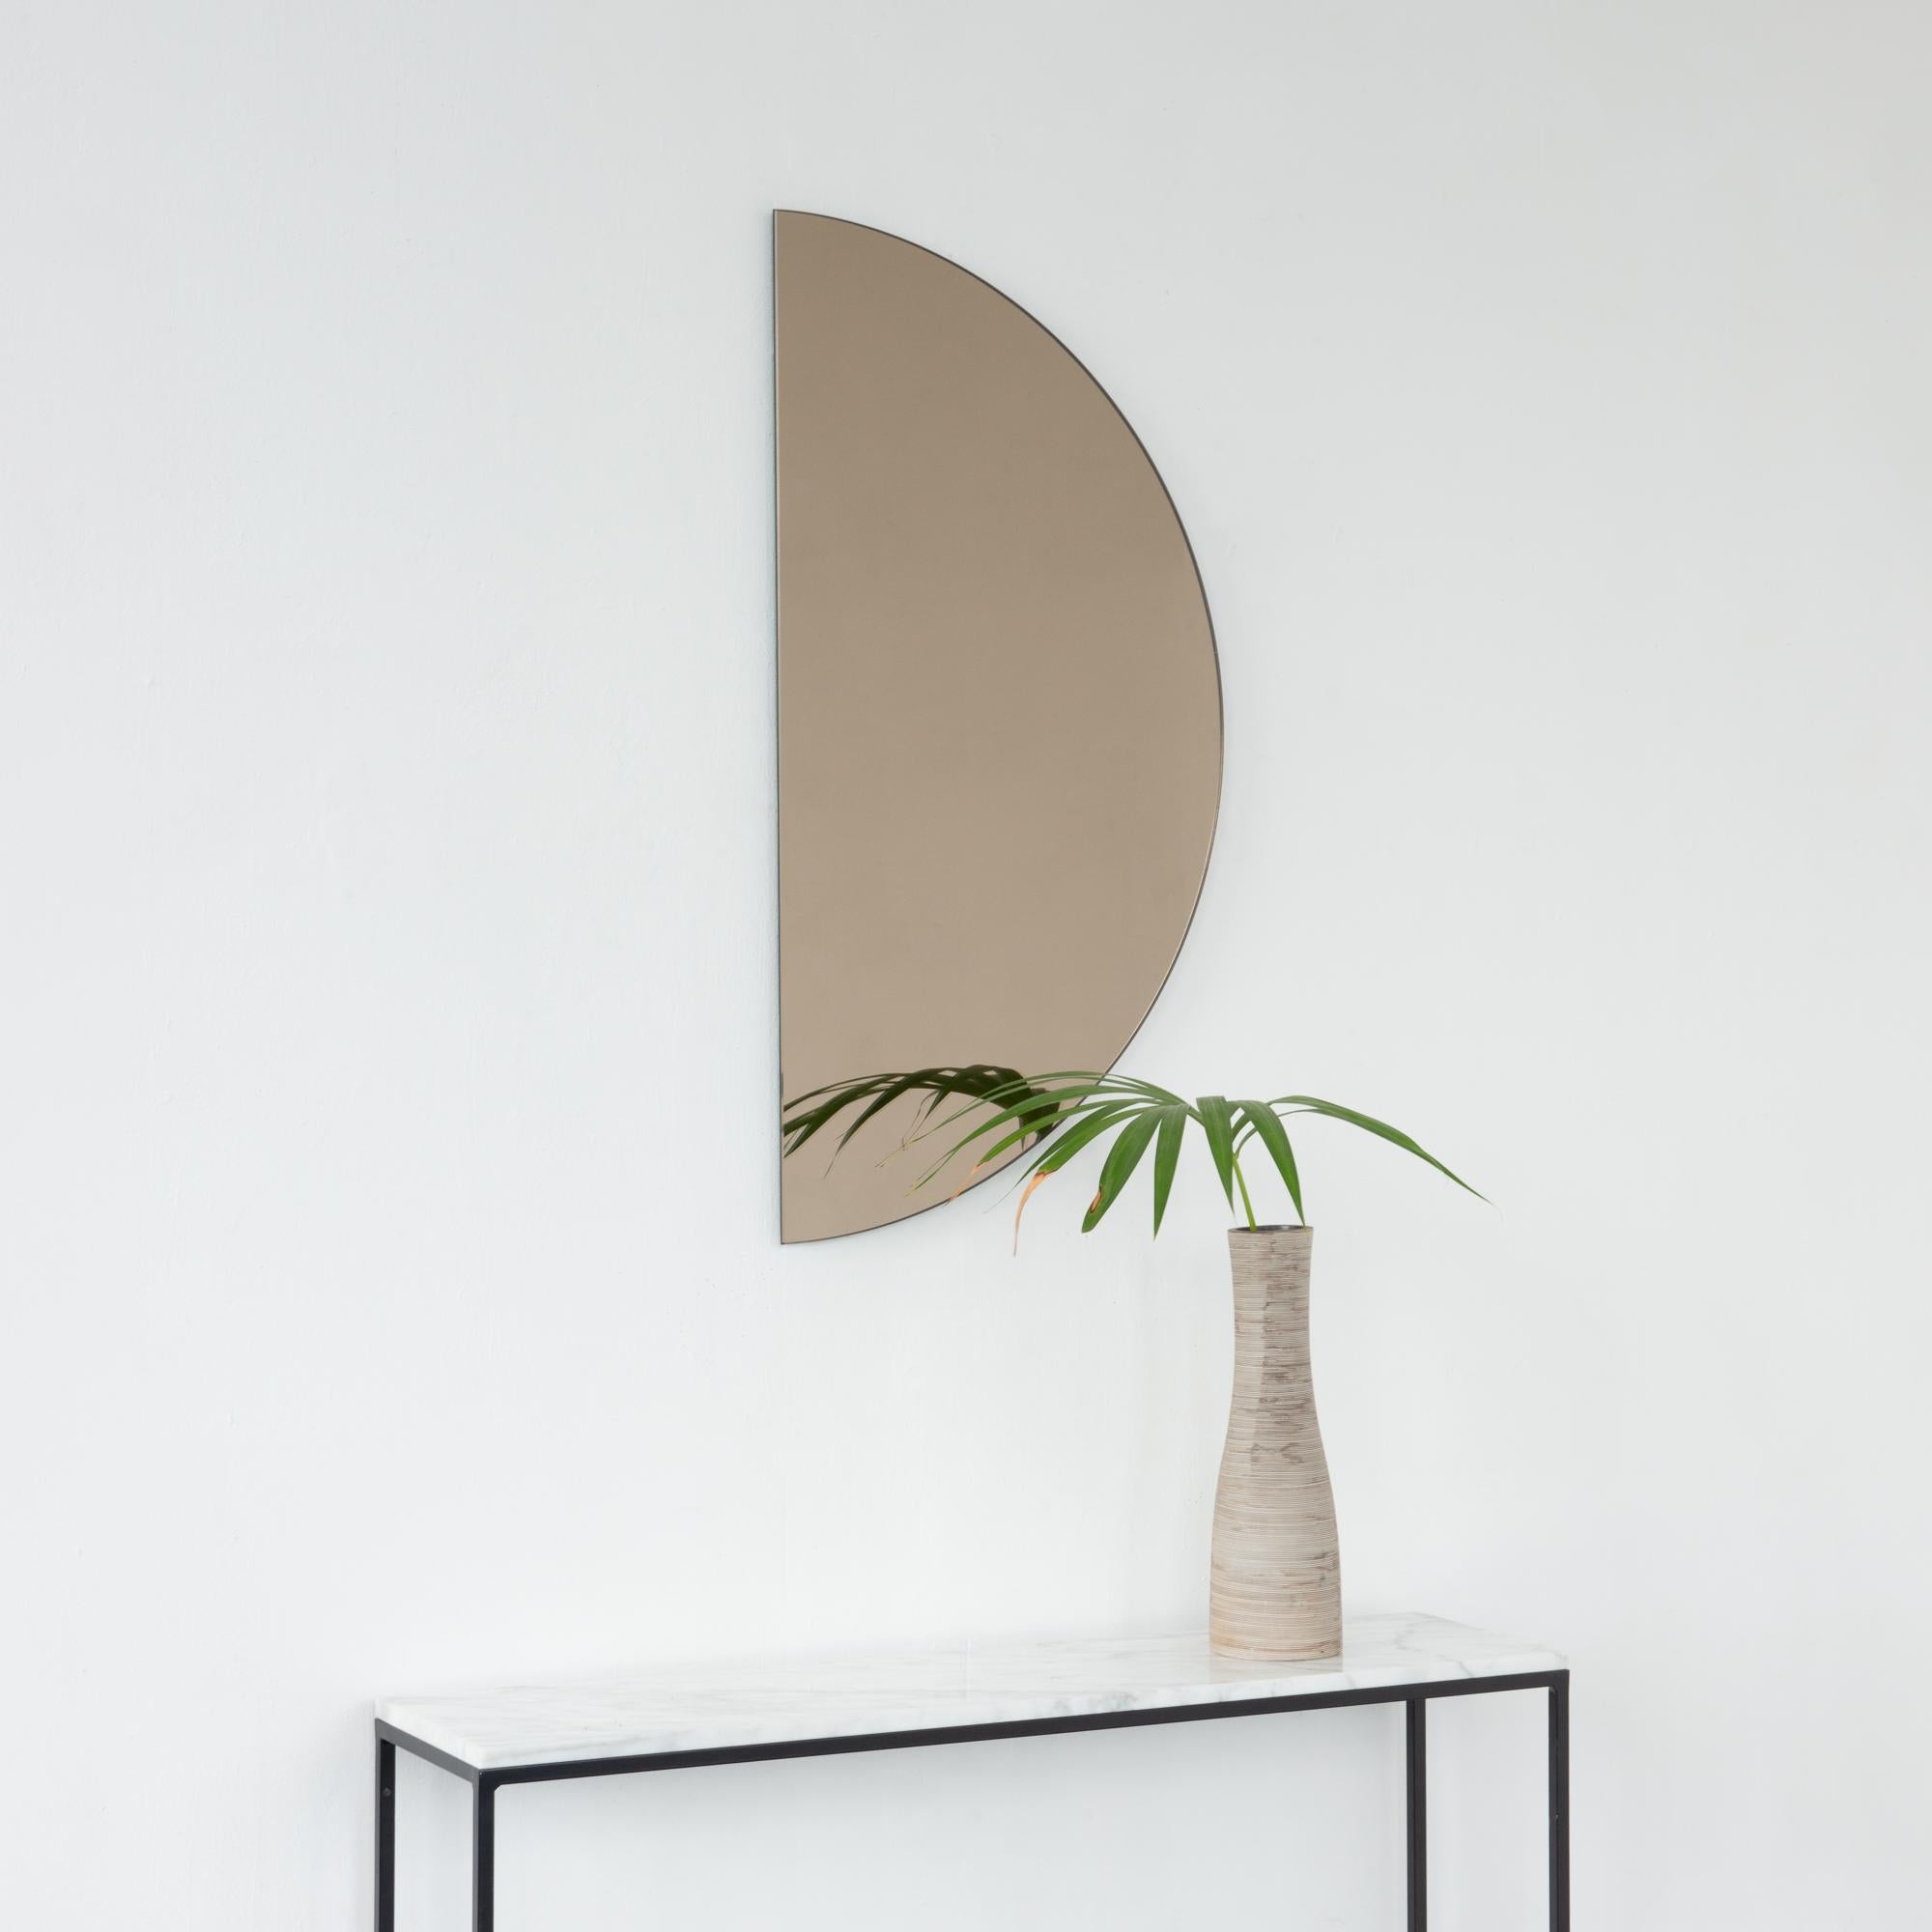 Minimalist half-moon Luna™ bronze tinted frameless mirror with a floating effect. Fitted with a quality and ingenious hanging system for a flexible installation in 4 different directions. Designed and made in London, UK. 

Our mirrors are designed